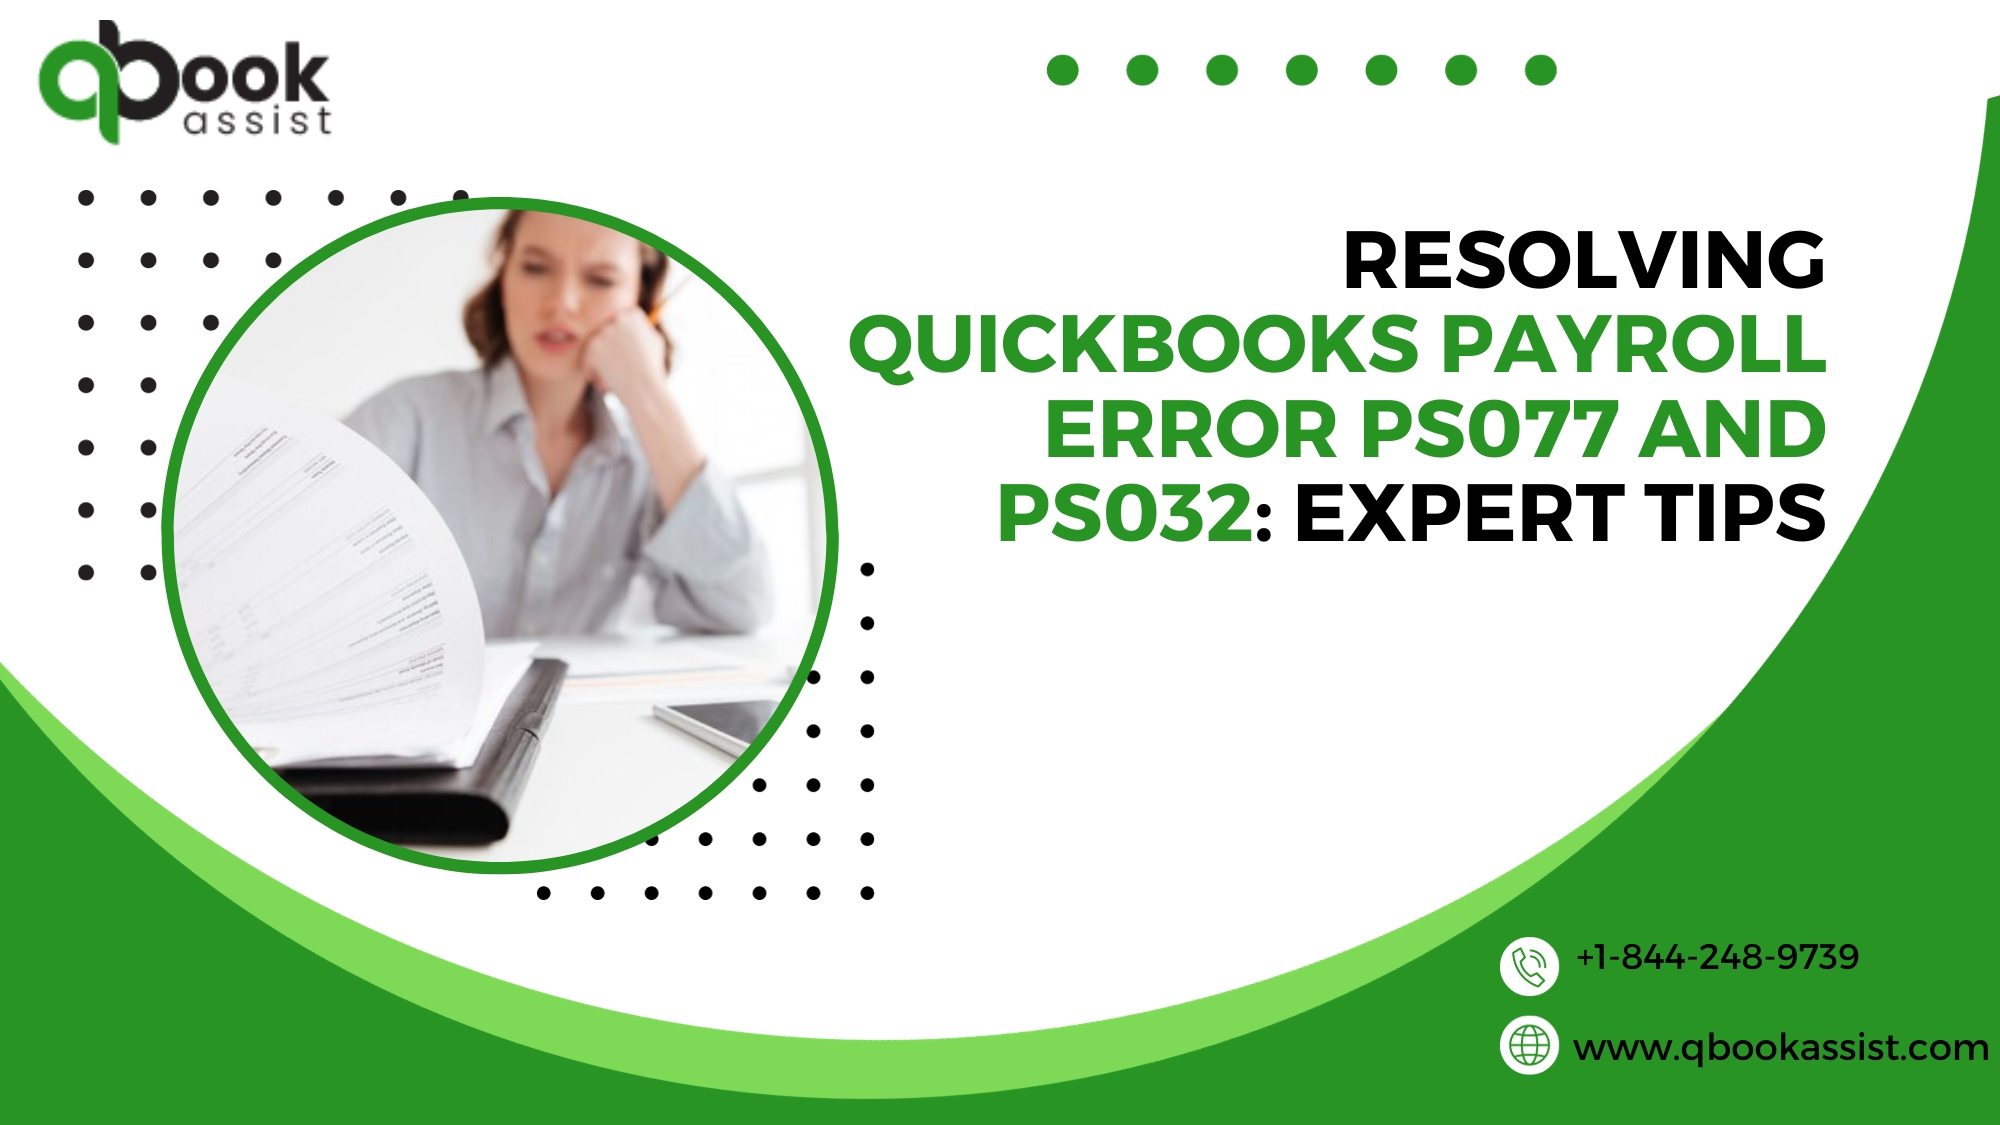 Resolving QuickBooks Payroll Error PS077 and PS032: Expert Tips